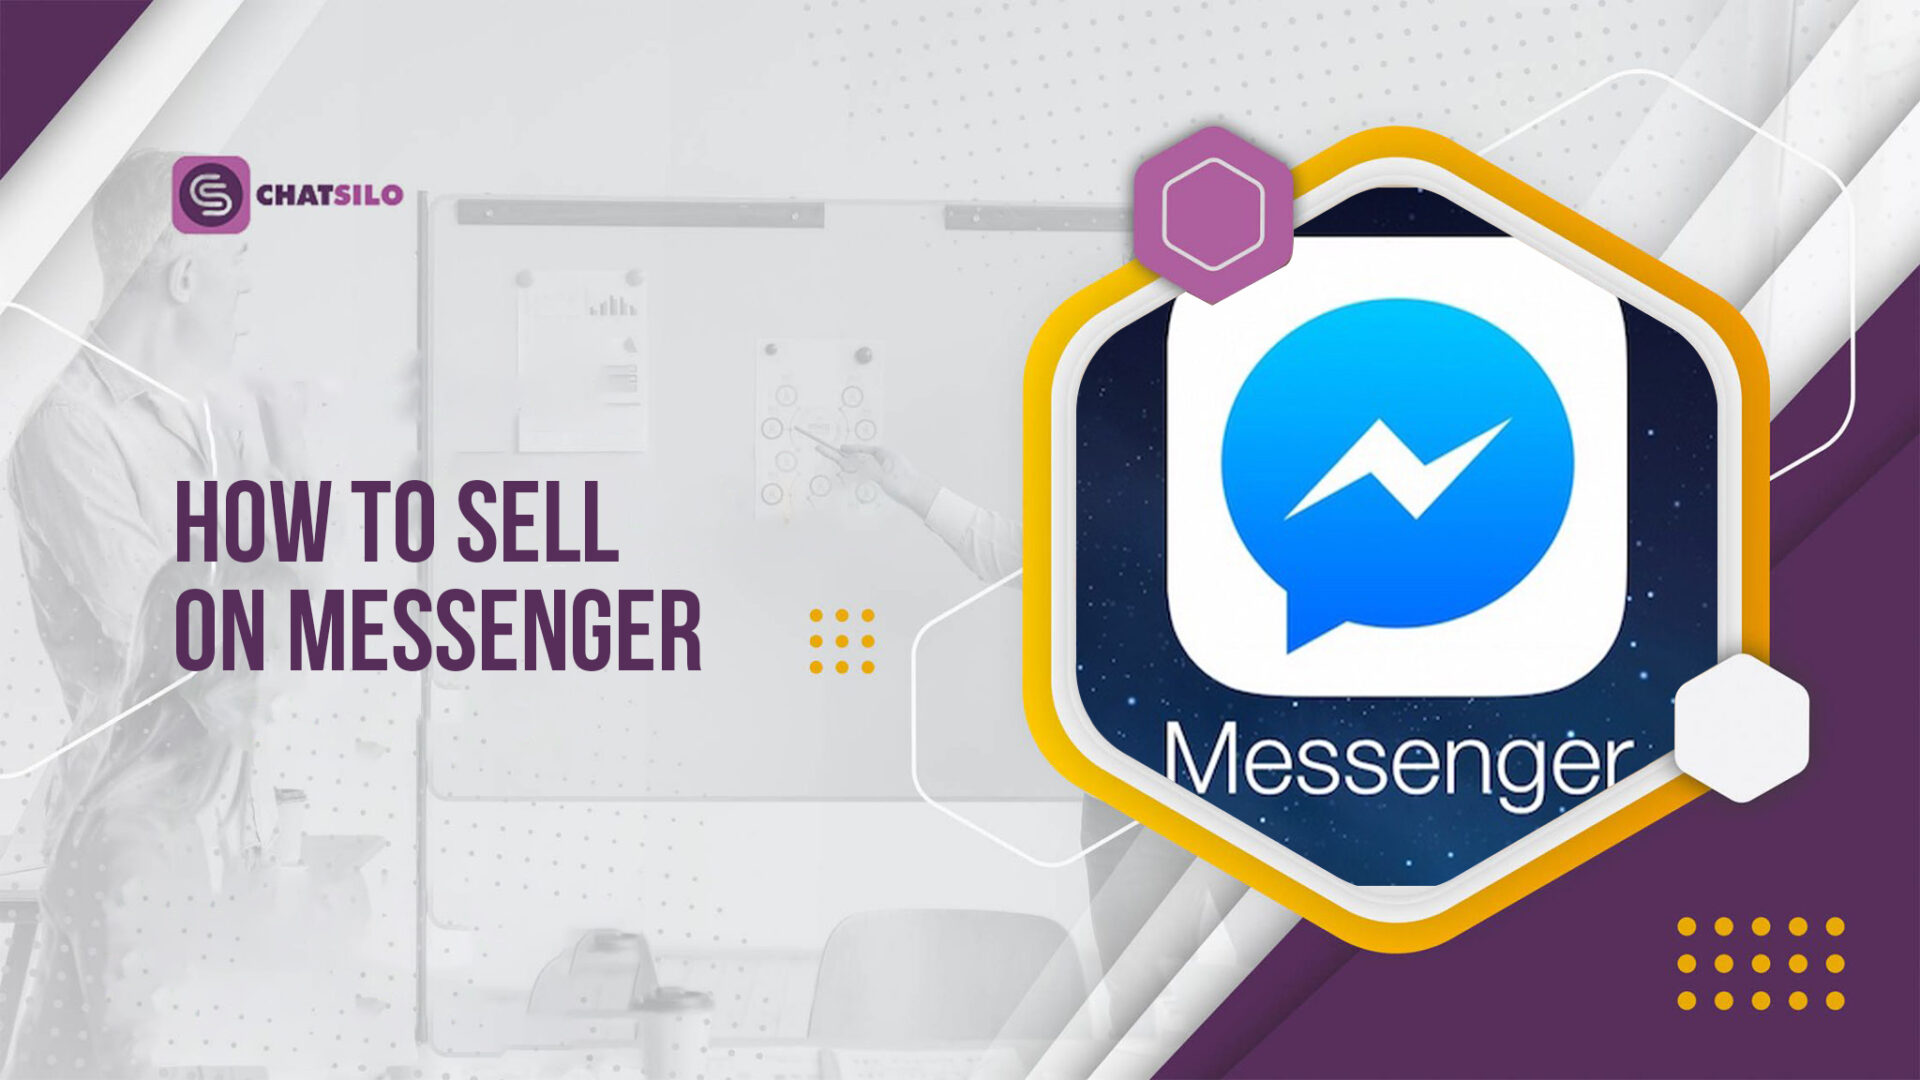 How to sell on messenger